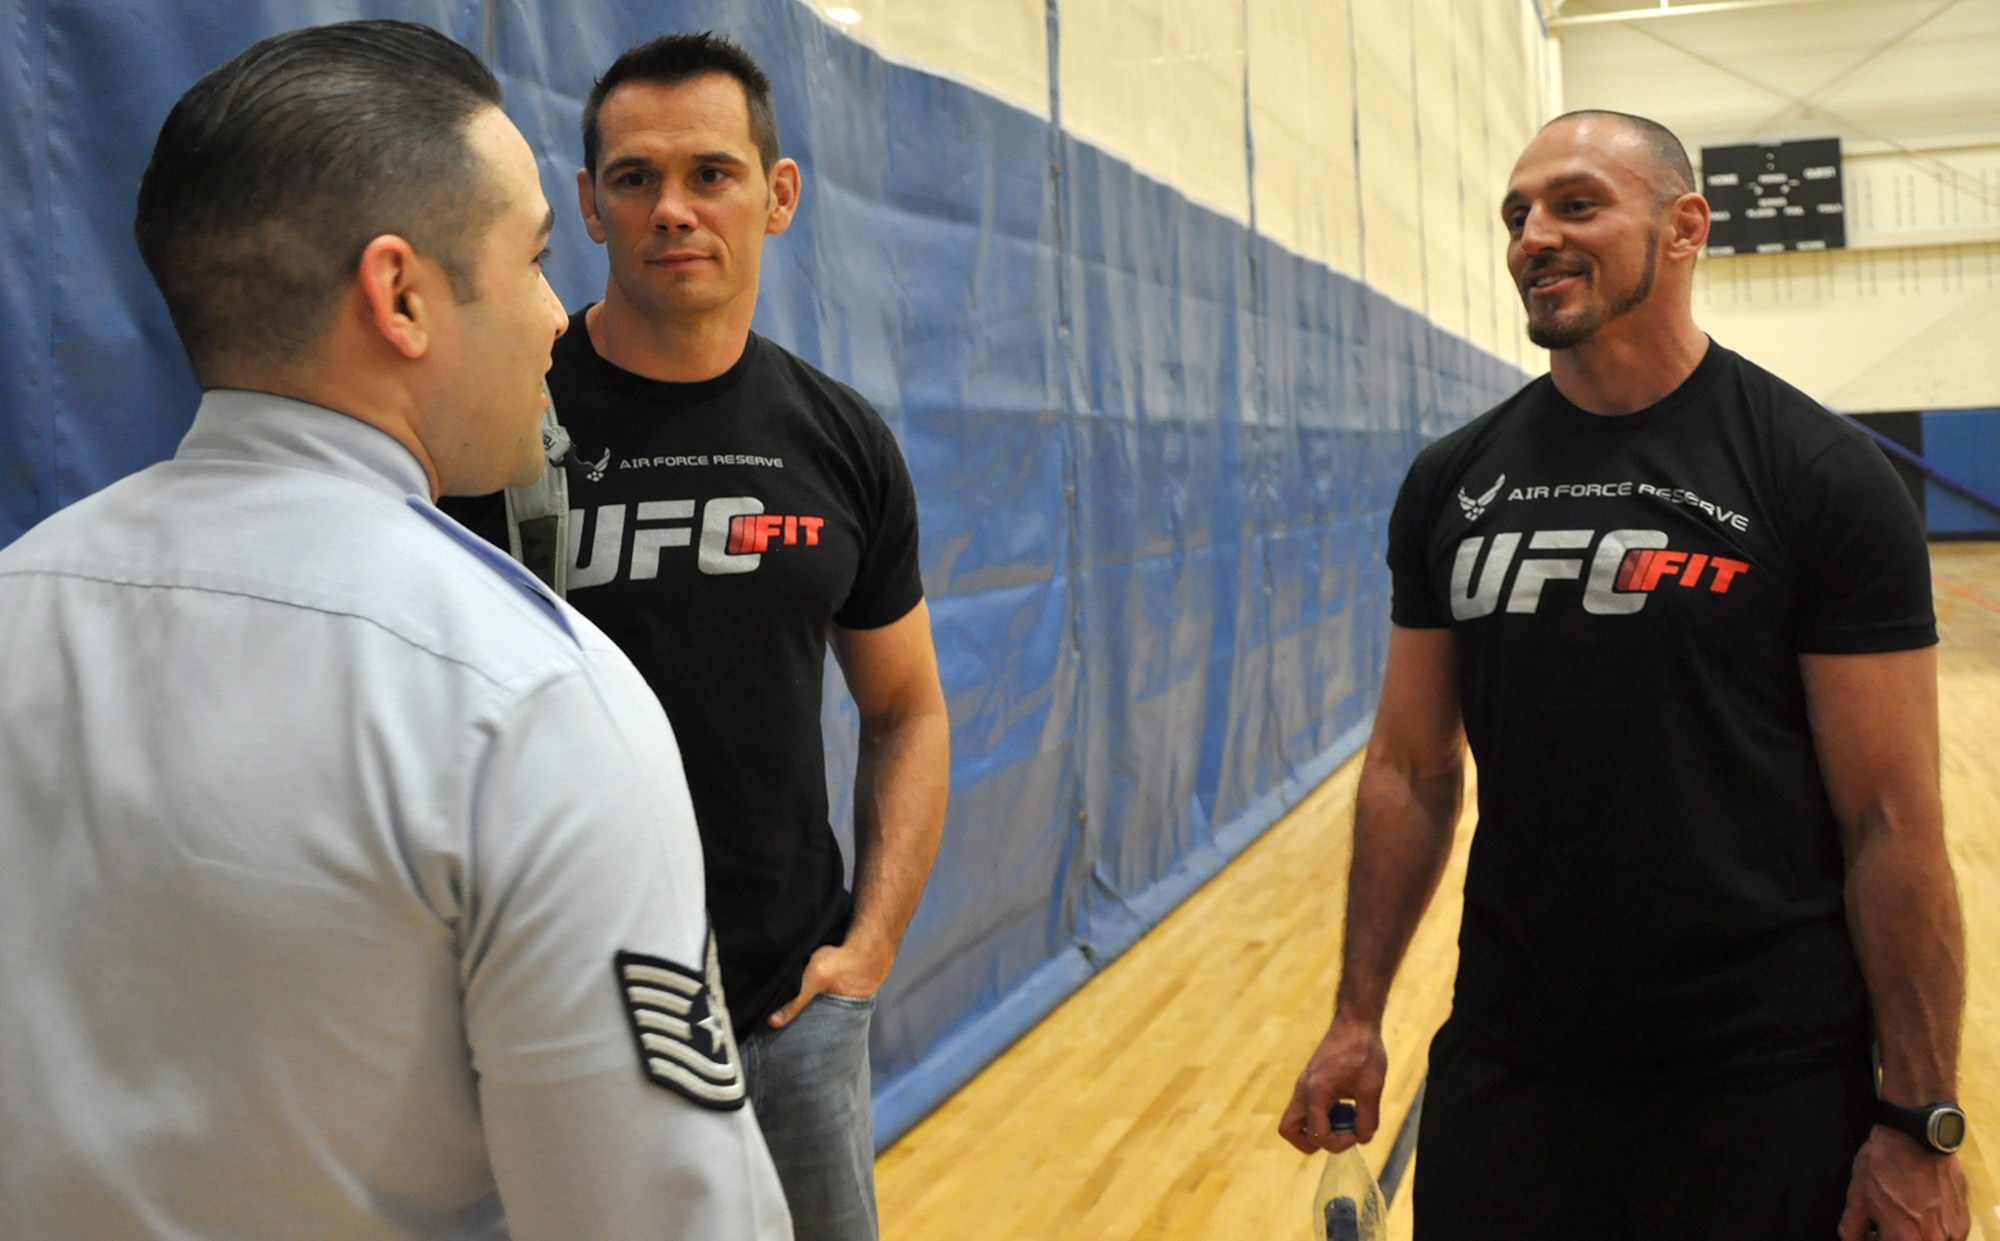 From left, Tech Sgt. Orlando Andajar, line recruiter with the 446th Airlift Wing, meets with UFC Middleweight Champion Rich Franklin and UFC Fit Coach Mike Dolce prior to a fitness workshop at Wilson Fitness Center at Lewis North May 3. The event, sponsored by Air Force Reserve Recruiting, was incorporated into this year’s Ultimate Fighting Champion Fit Tour. (U.S. Air Force Reserve photo by Tech. Sgt. Minnette Mason)